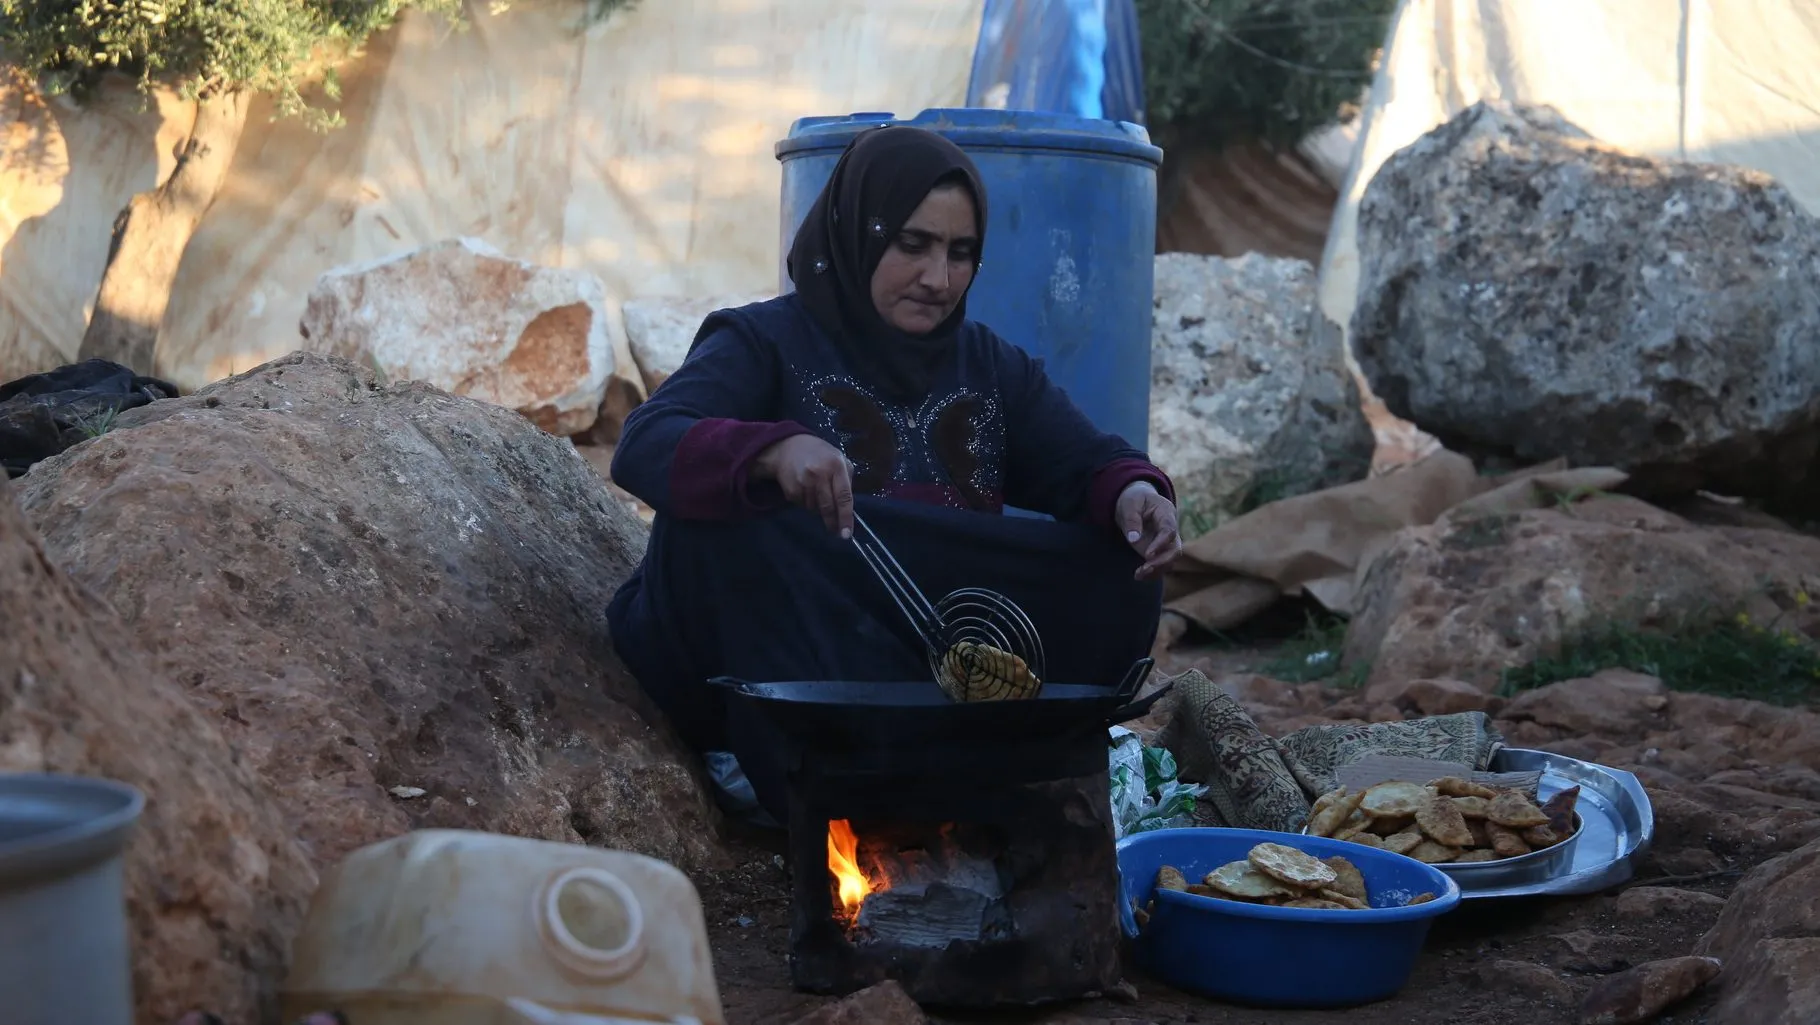 A Syrian woman in dark clothing cooks over an open fire in a displacement camp